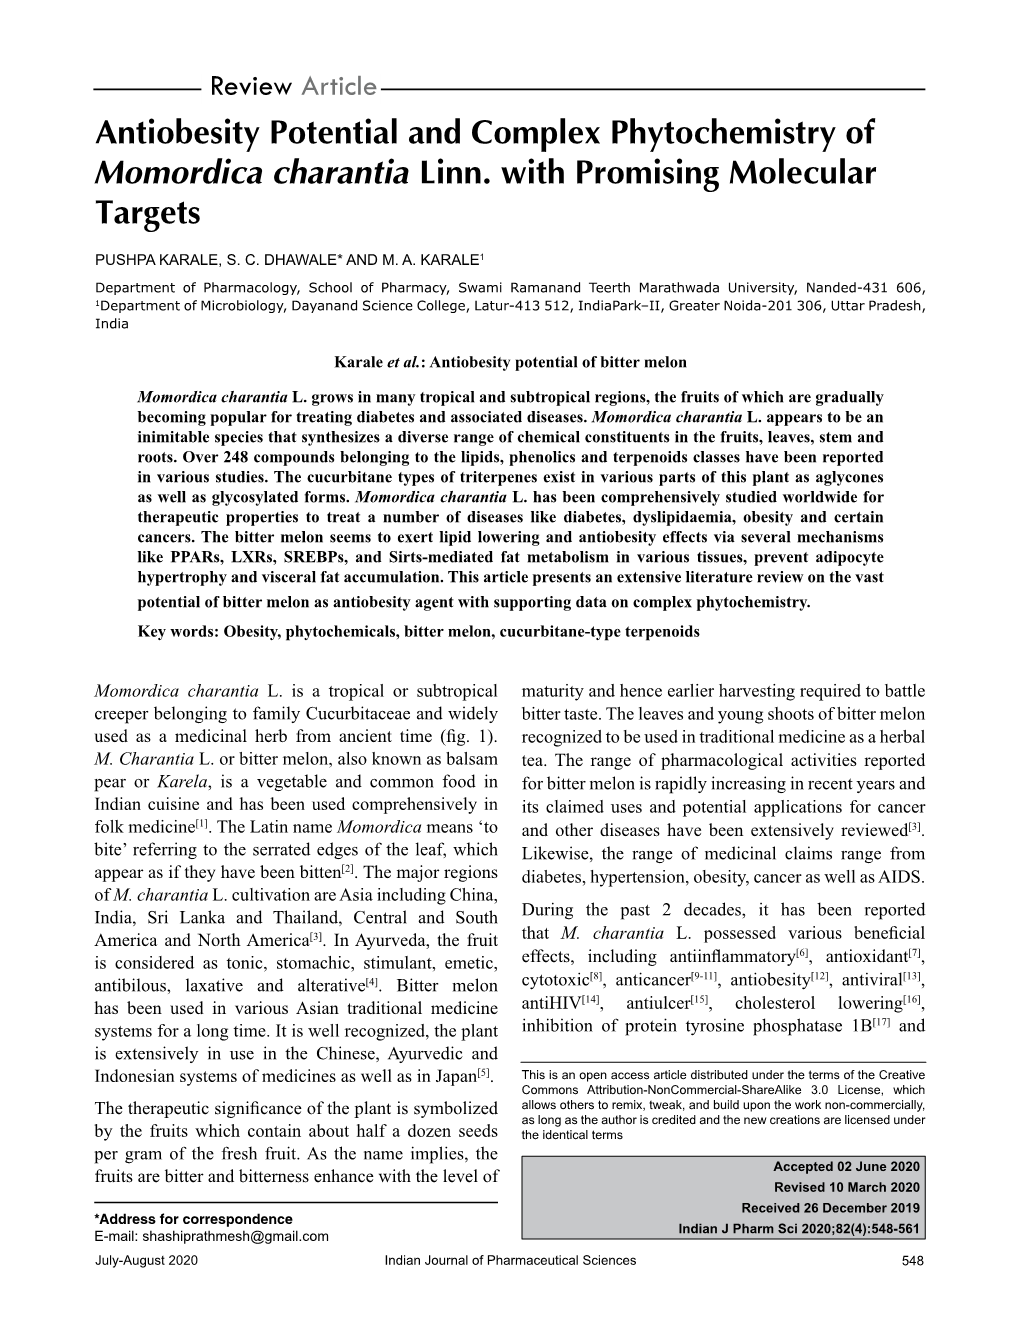 Antiobesity Potential and Complex Phytochemistry of Momordica Charantia Linn